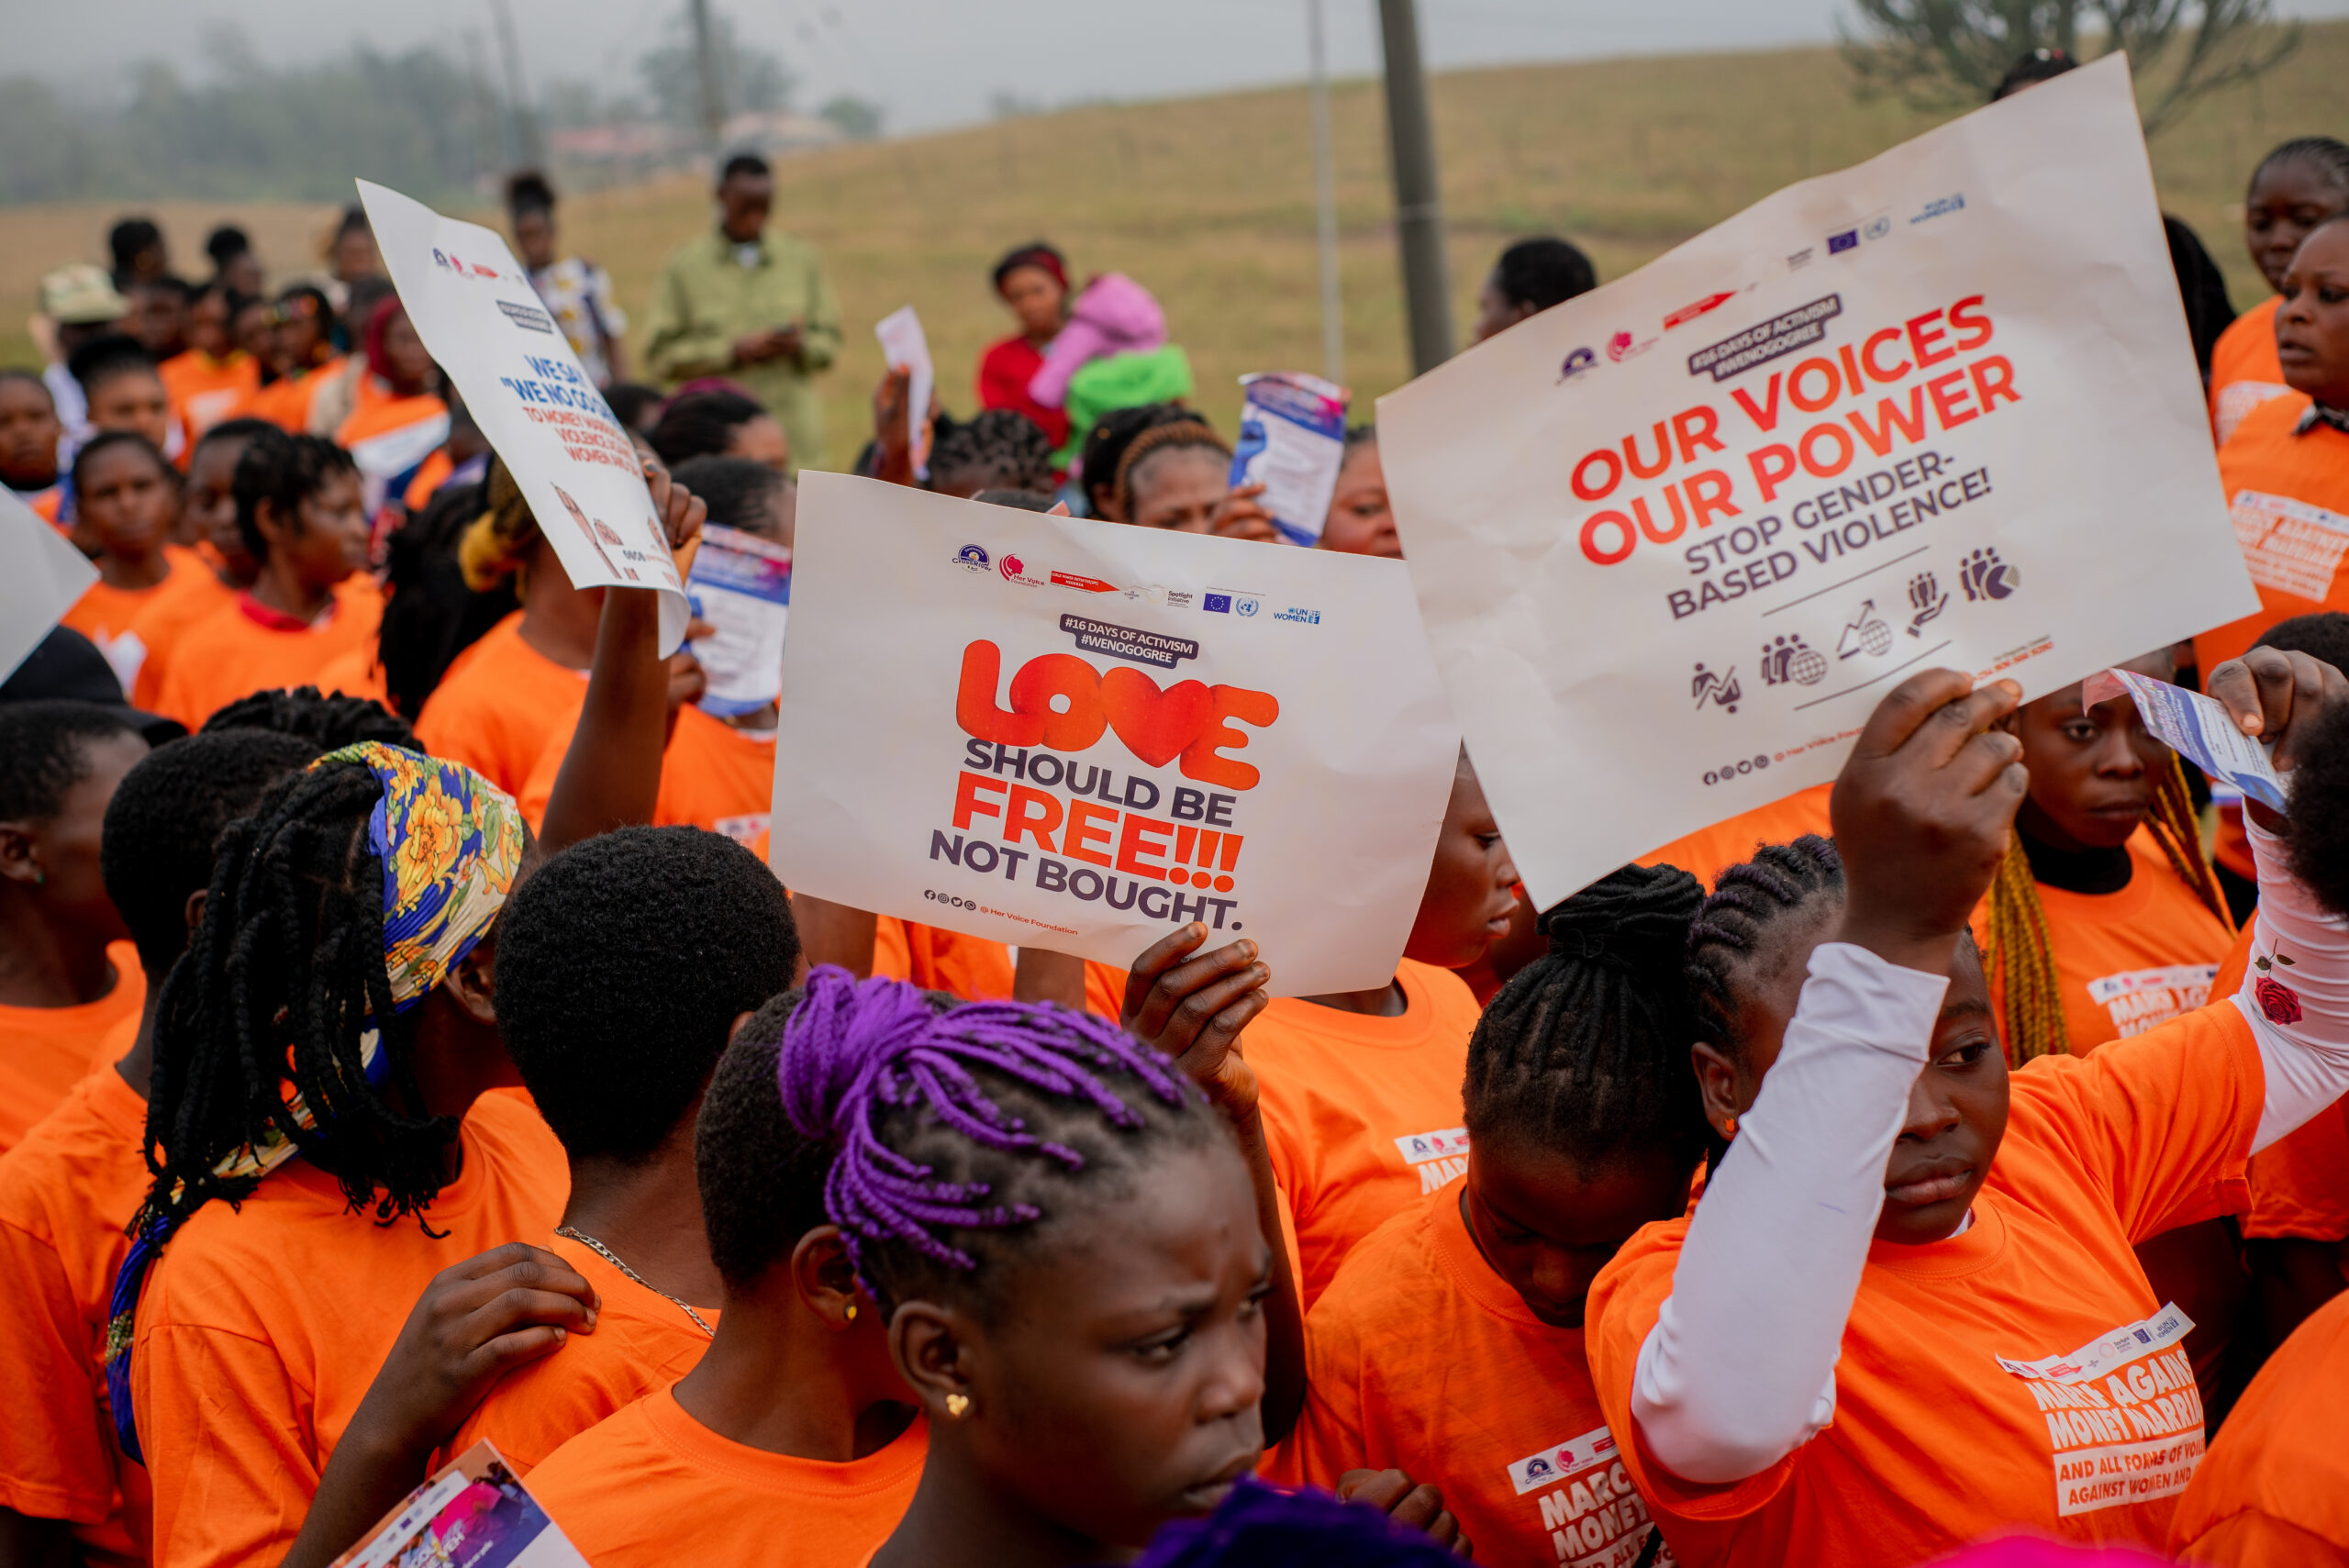 Placards from the 500-woman march against money marriage. Photo credit: Her Voice Foundation